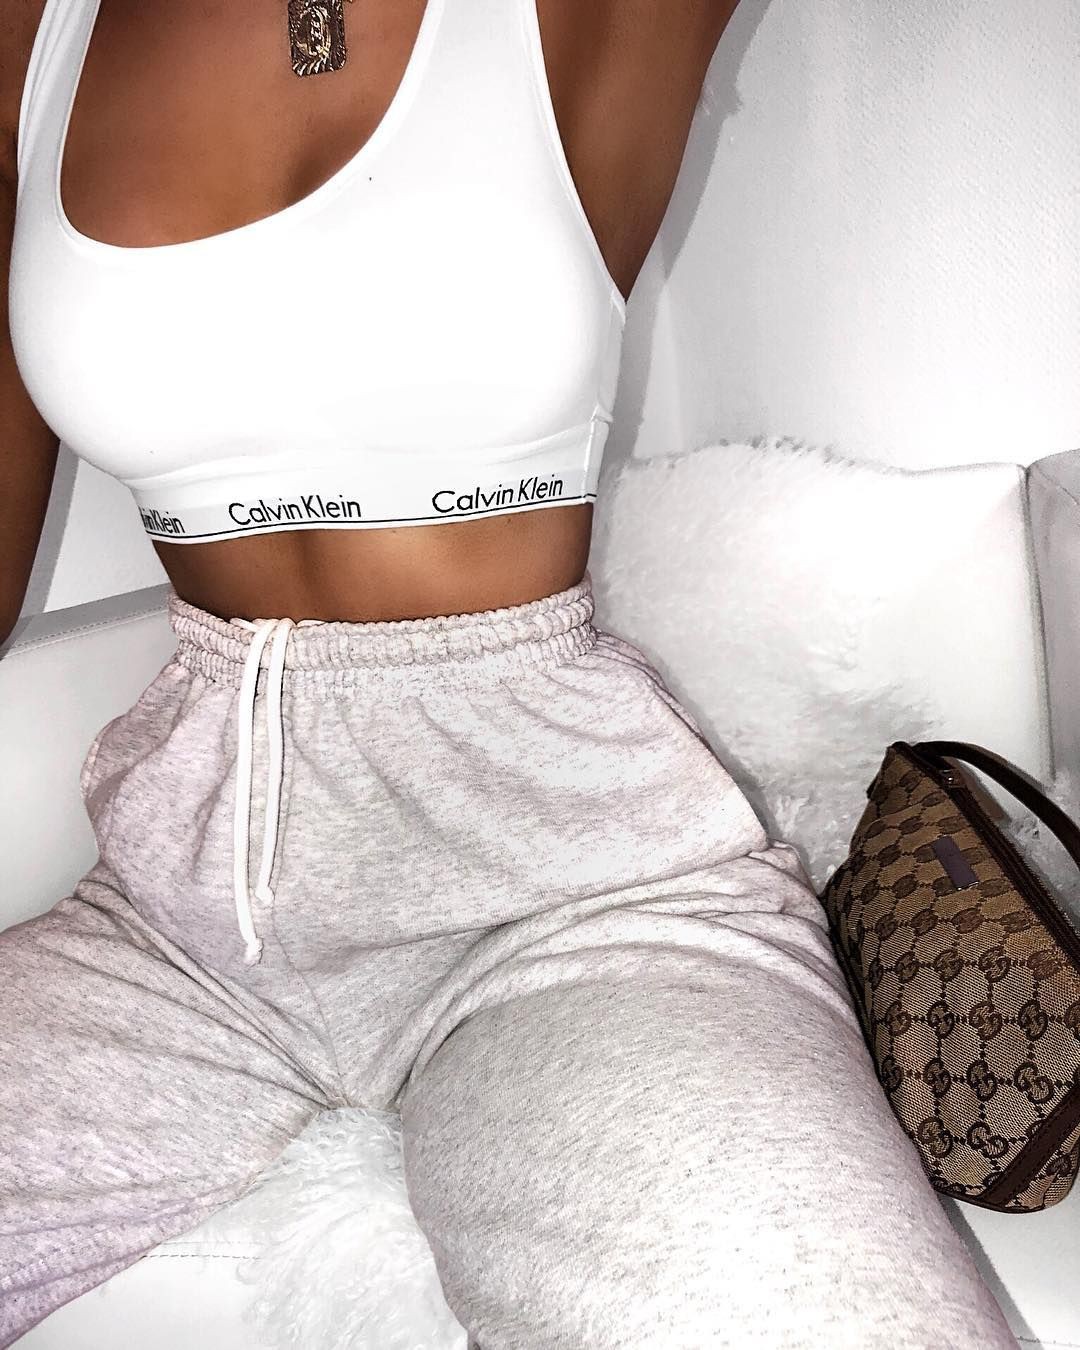 Great ideas for the calvin klein instagram: Calvin Klein,  Urban Outfitters,  Sweatpants Outfits  